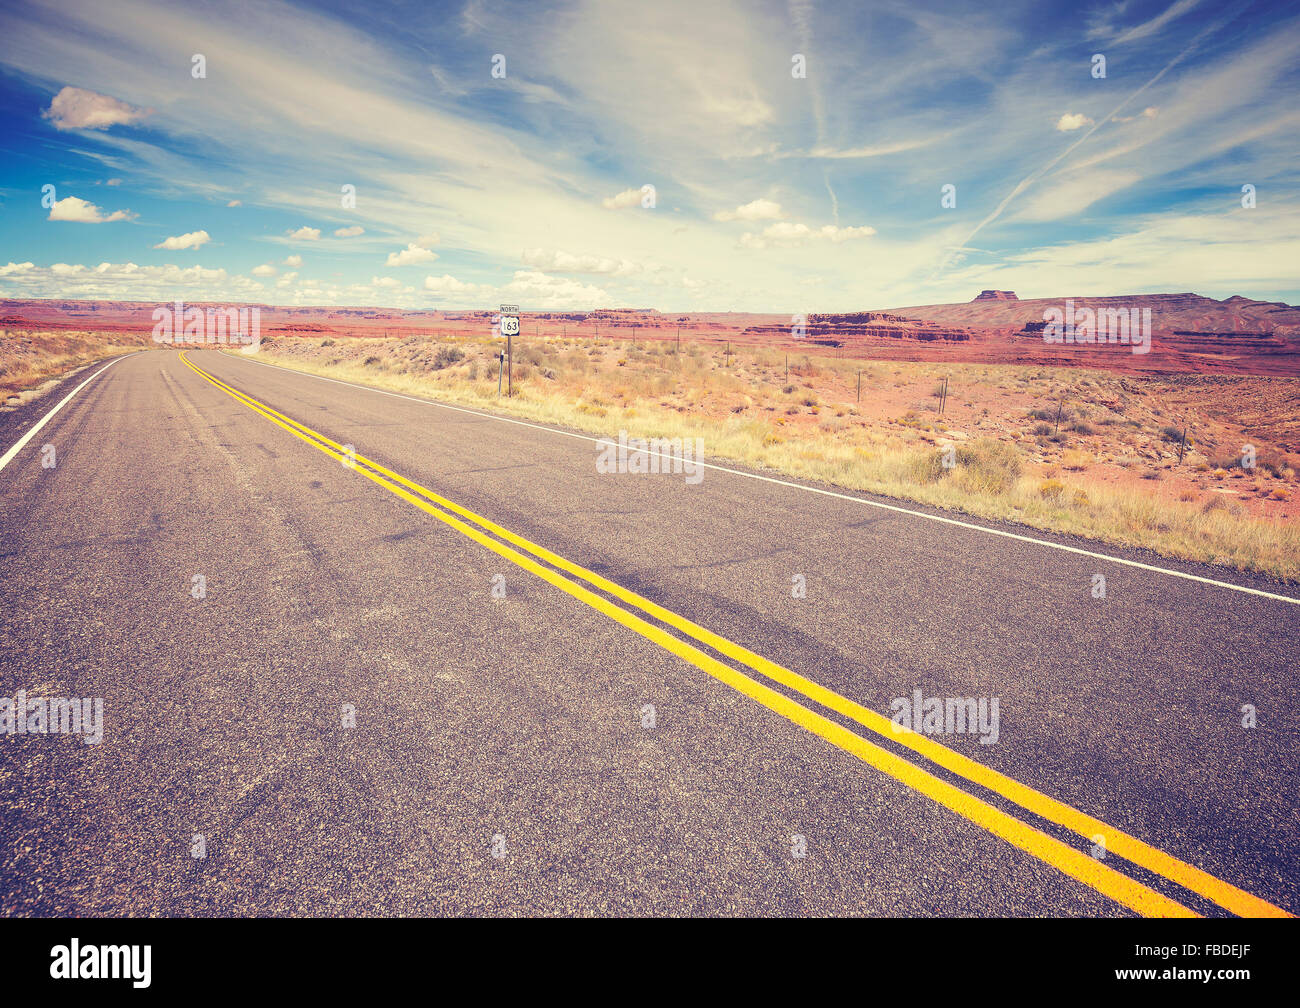 Vintage stylized endless country highway, USA. Stock Photo